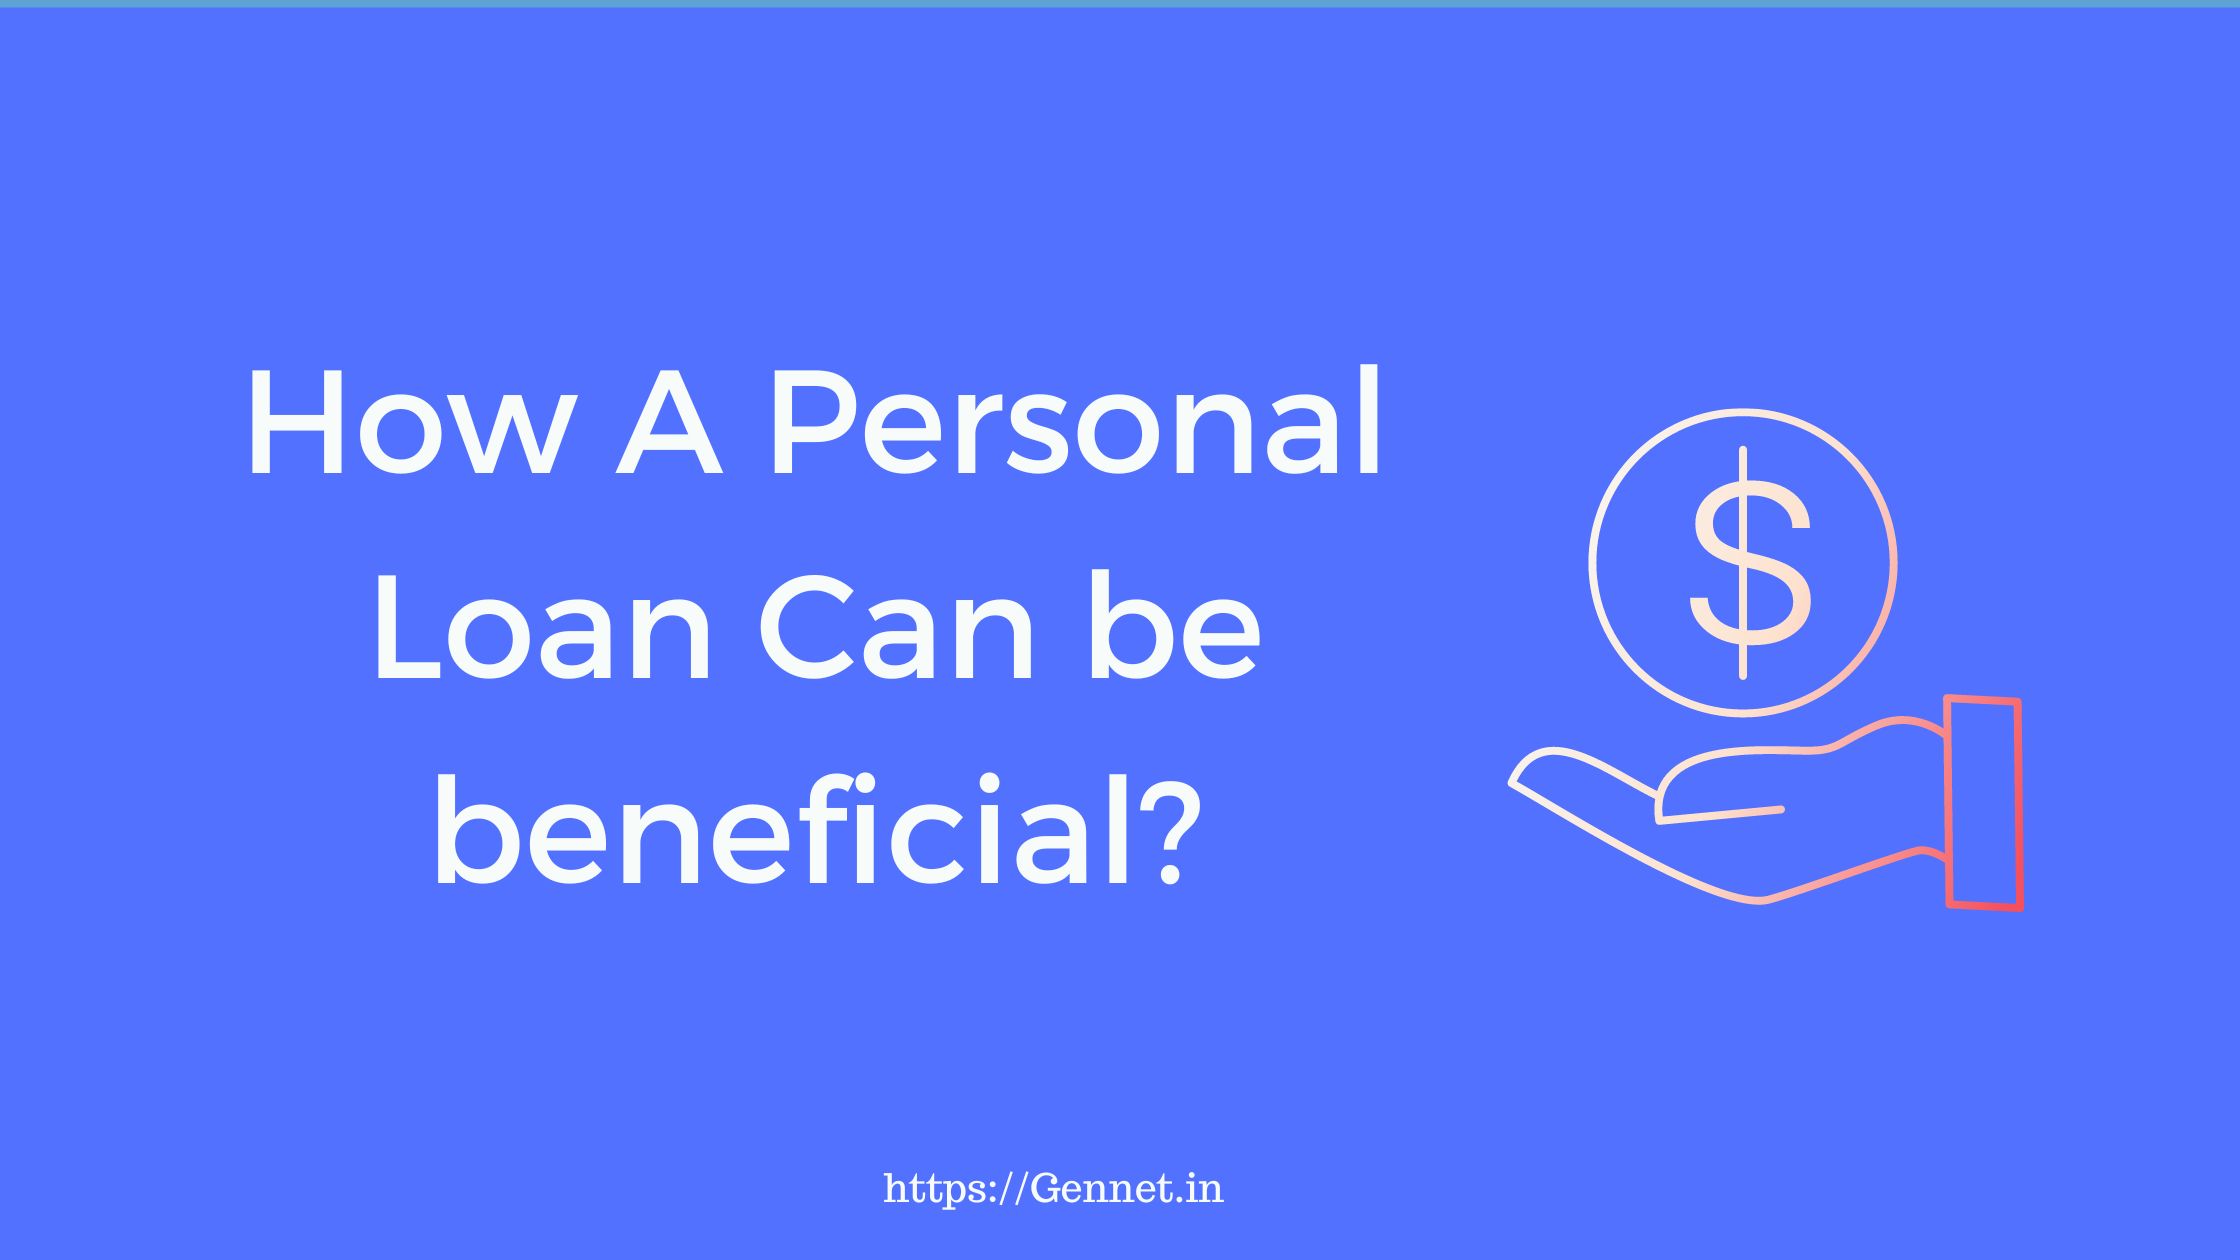 What are the benefits of Obtaining A Personal loan?